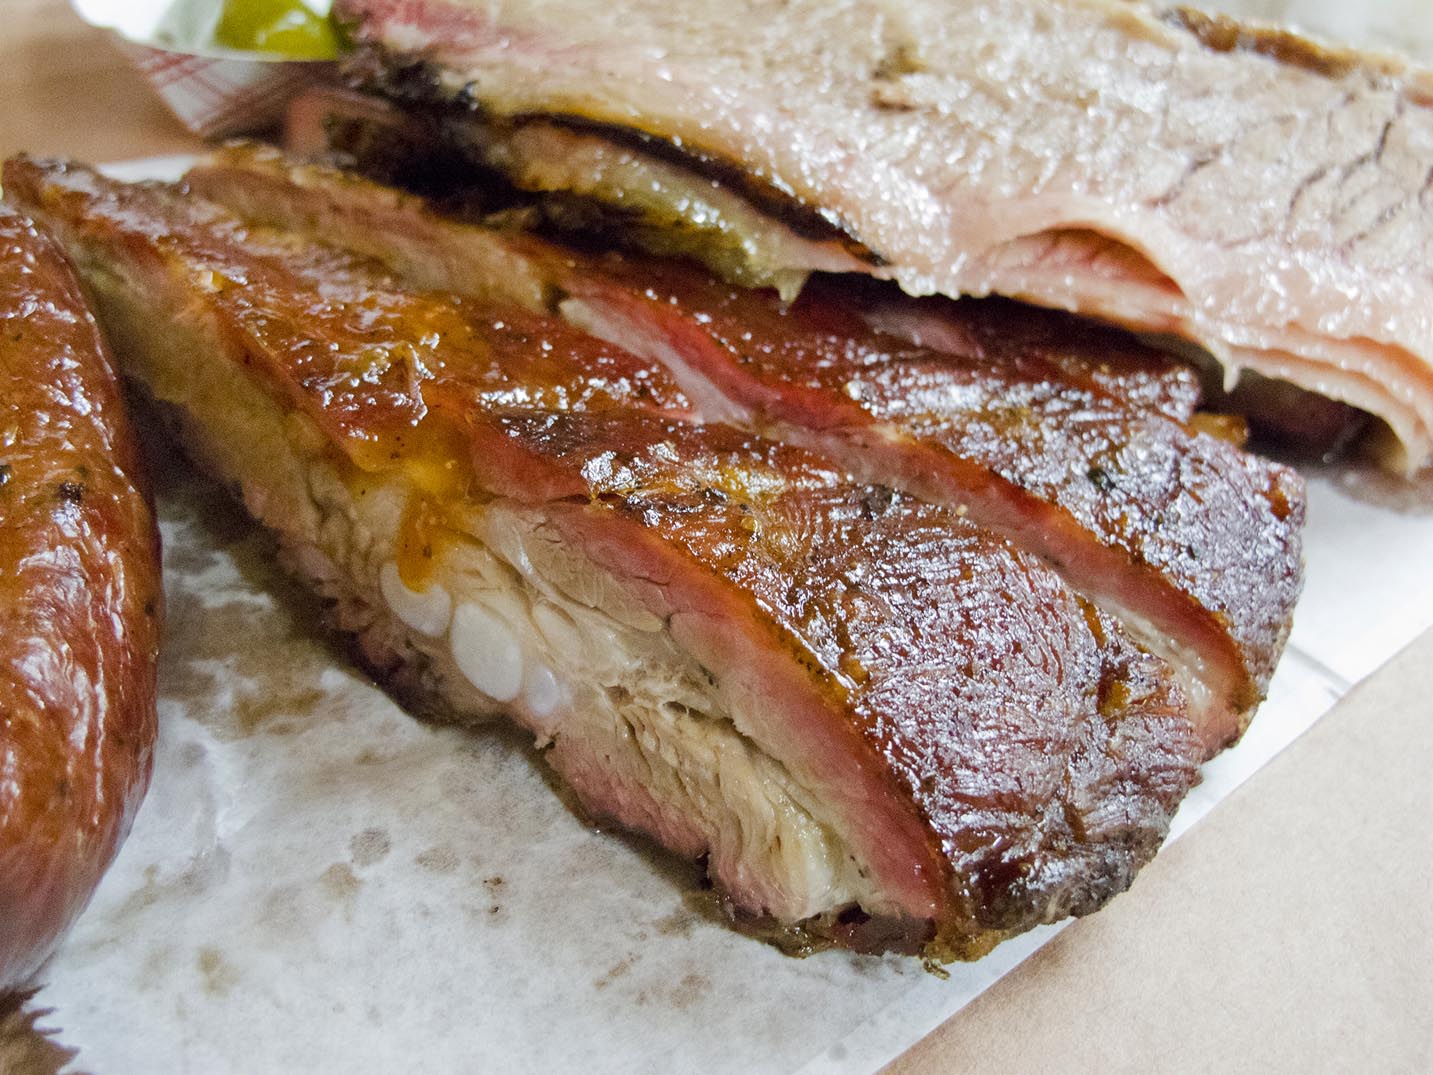 Texas-style BBQ pork ribs from Luling, Texas.